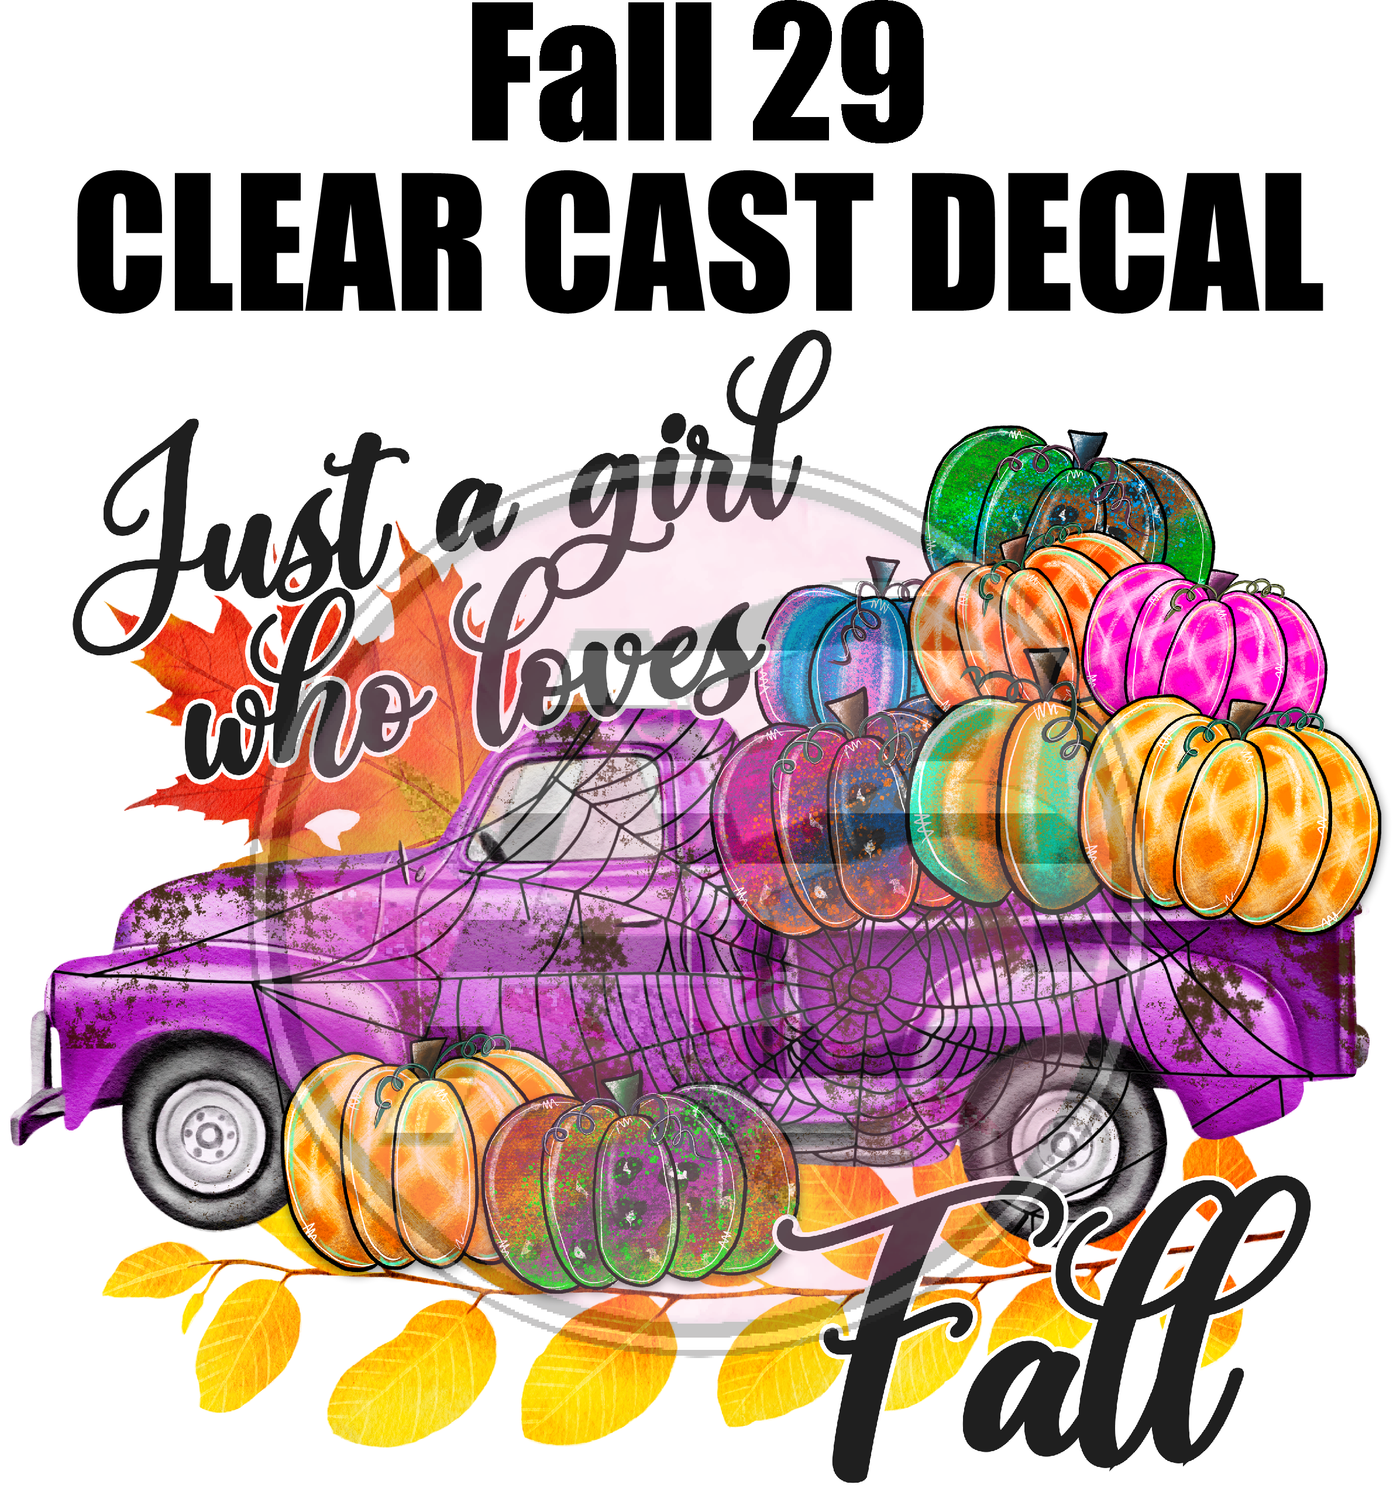 Fall 29 - Clear Cast Decal